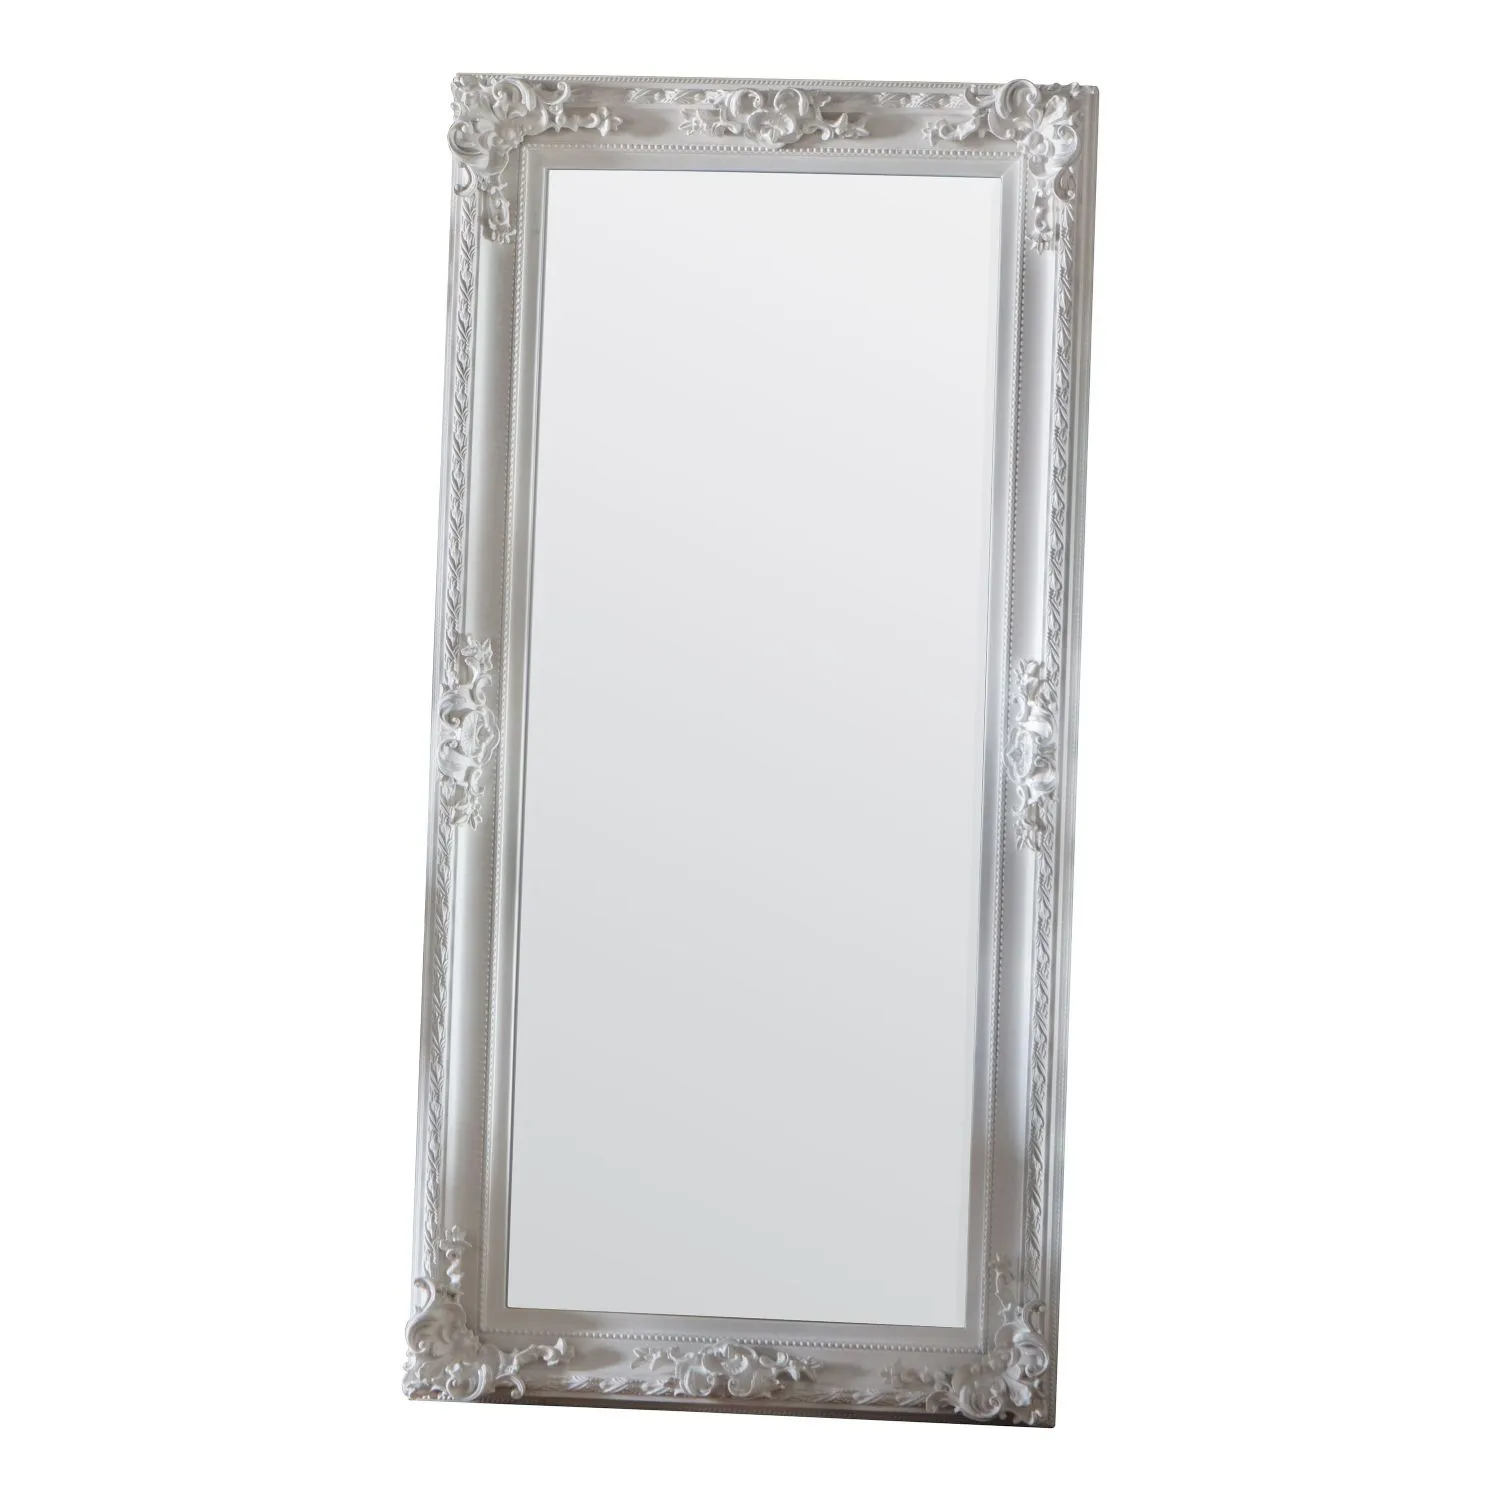 Tall White Painted Ornate Carved Leaner Floor Mirror